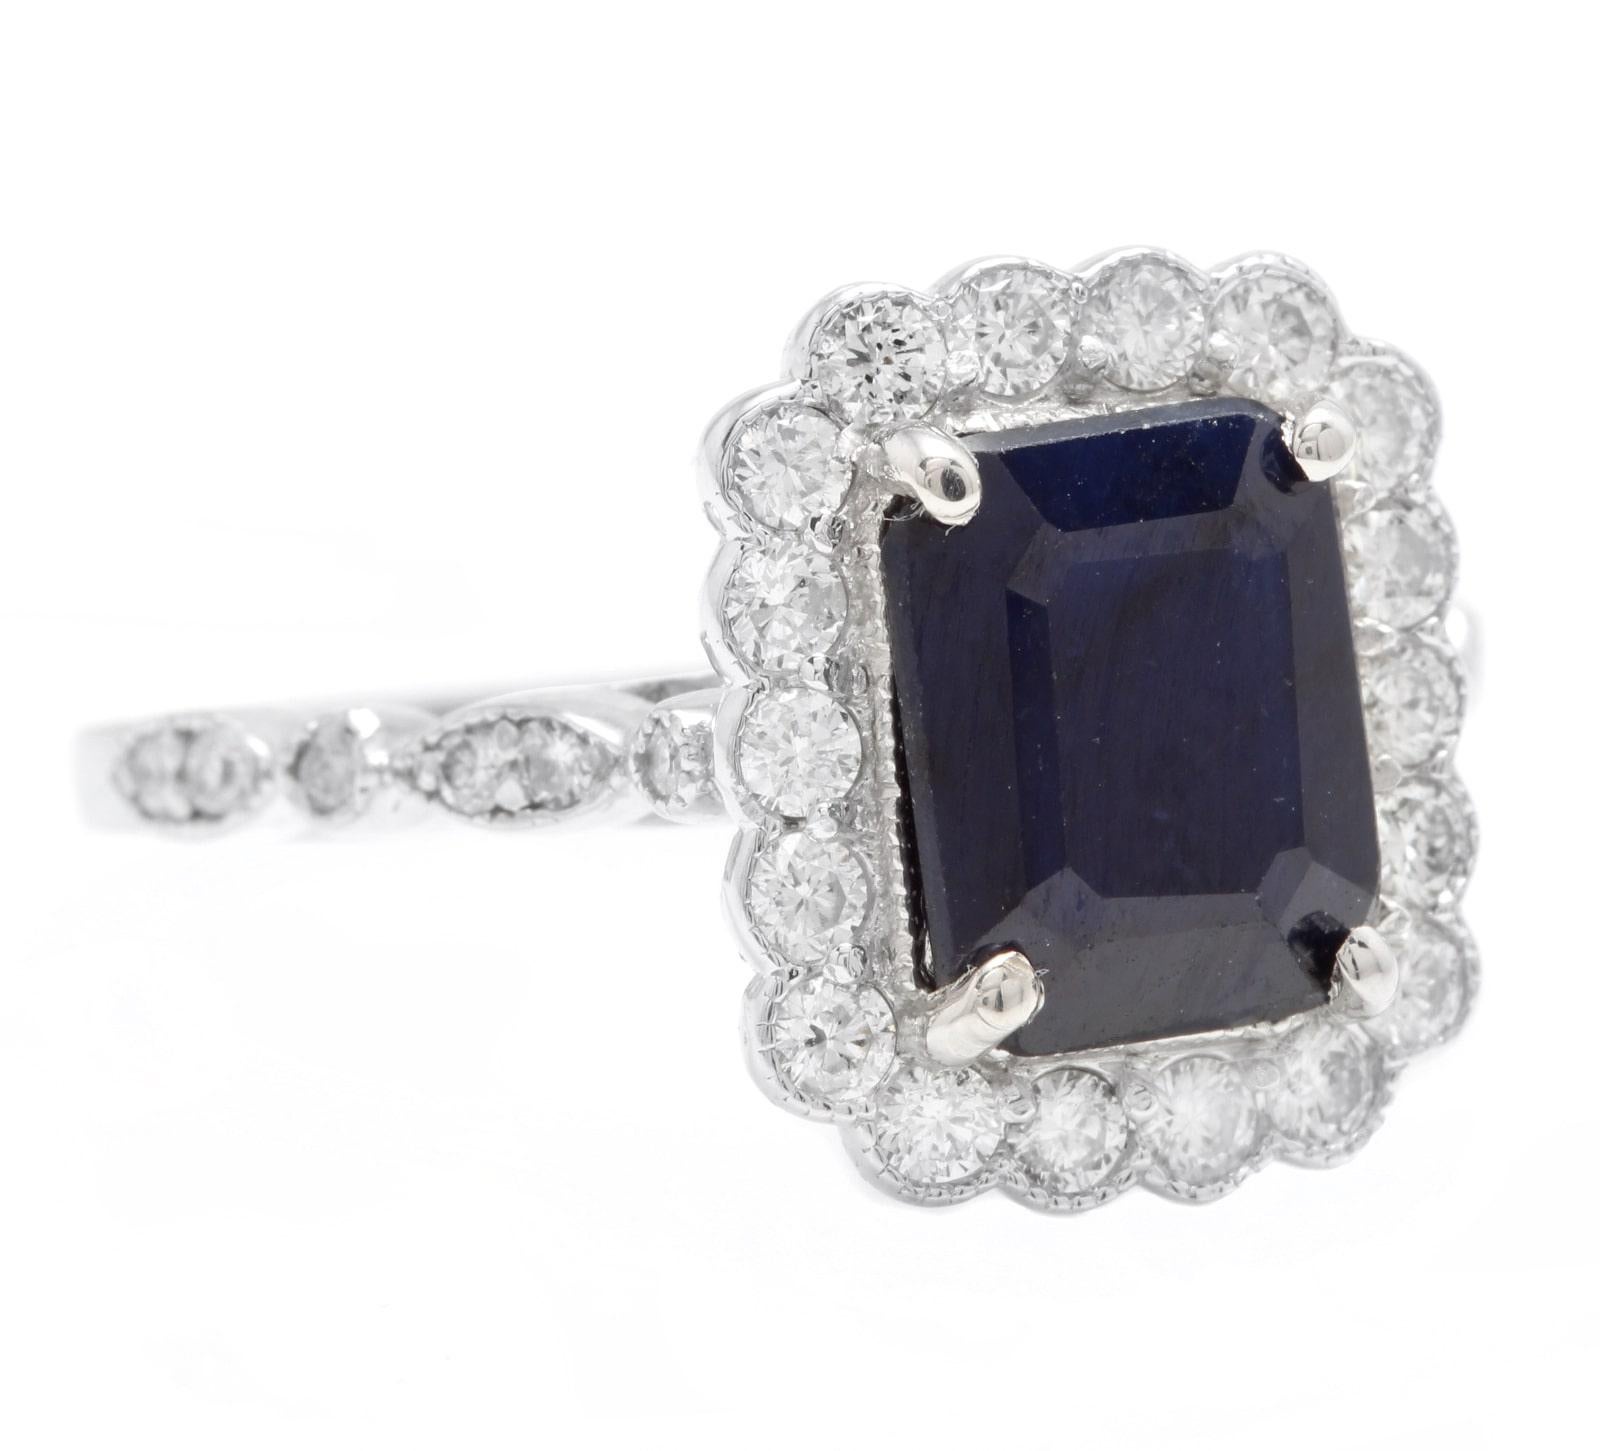 3.60 Carats Natural Sapphire and Diamond 14K Solid White Gold Ring

Suggested Replacement Value: Approx. $5,000.00

Total Natural Emerald Cut Sapphire Weights: Approx. 3.00 Carats 

Sapphire Measures: Approx. 9.00 x 7.00mm

Sapphire Treatment: